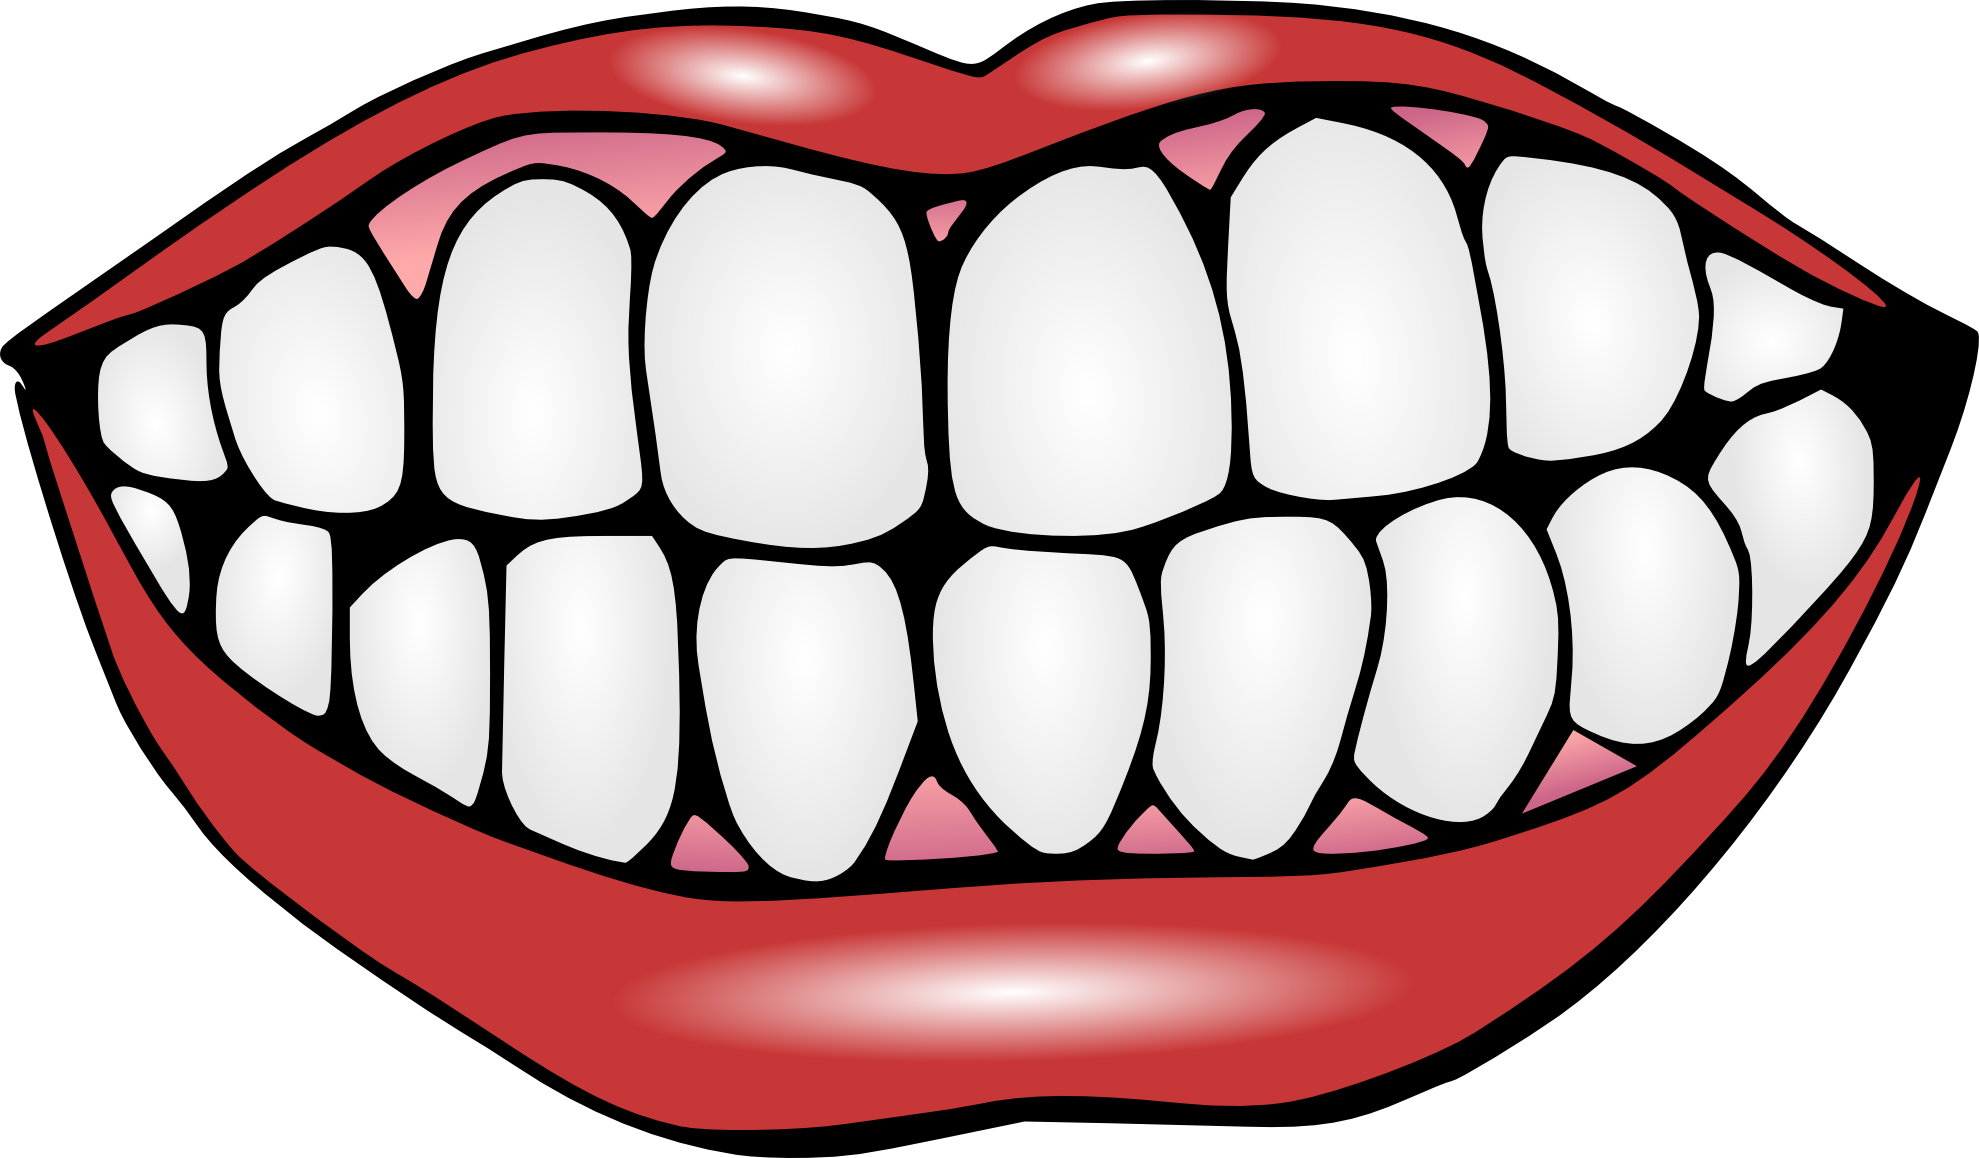 Human mouth clip art. Tooth clipart lip